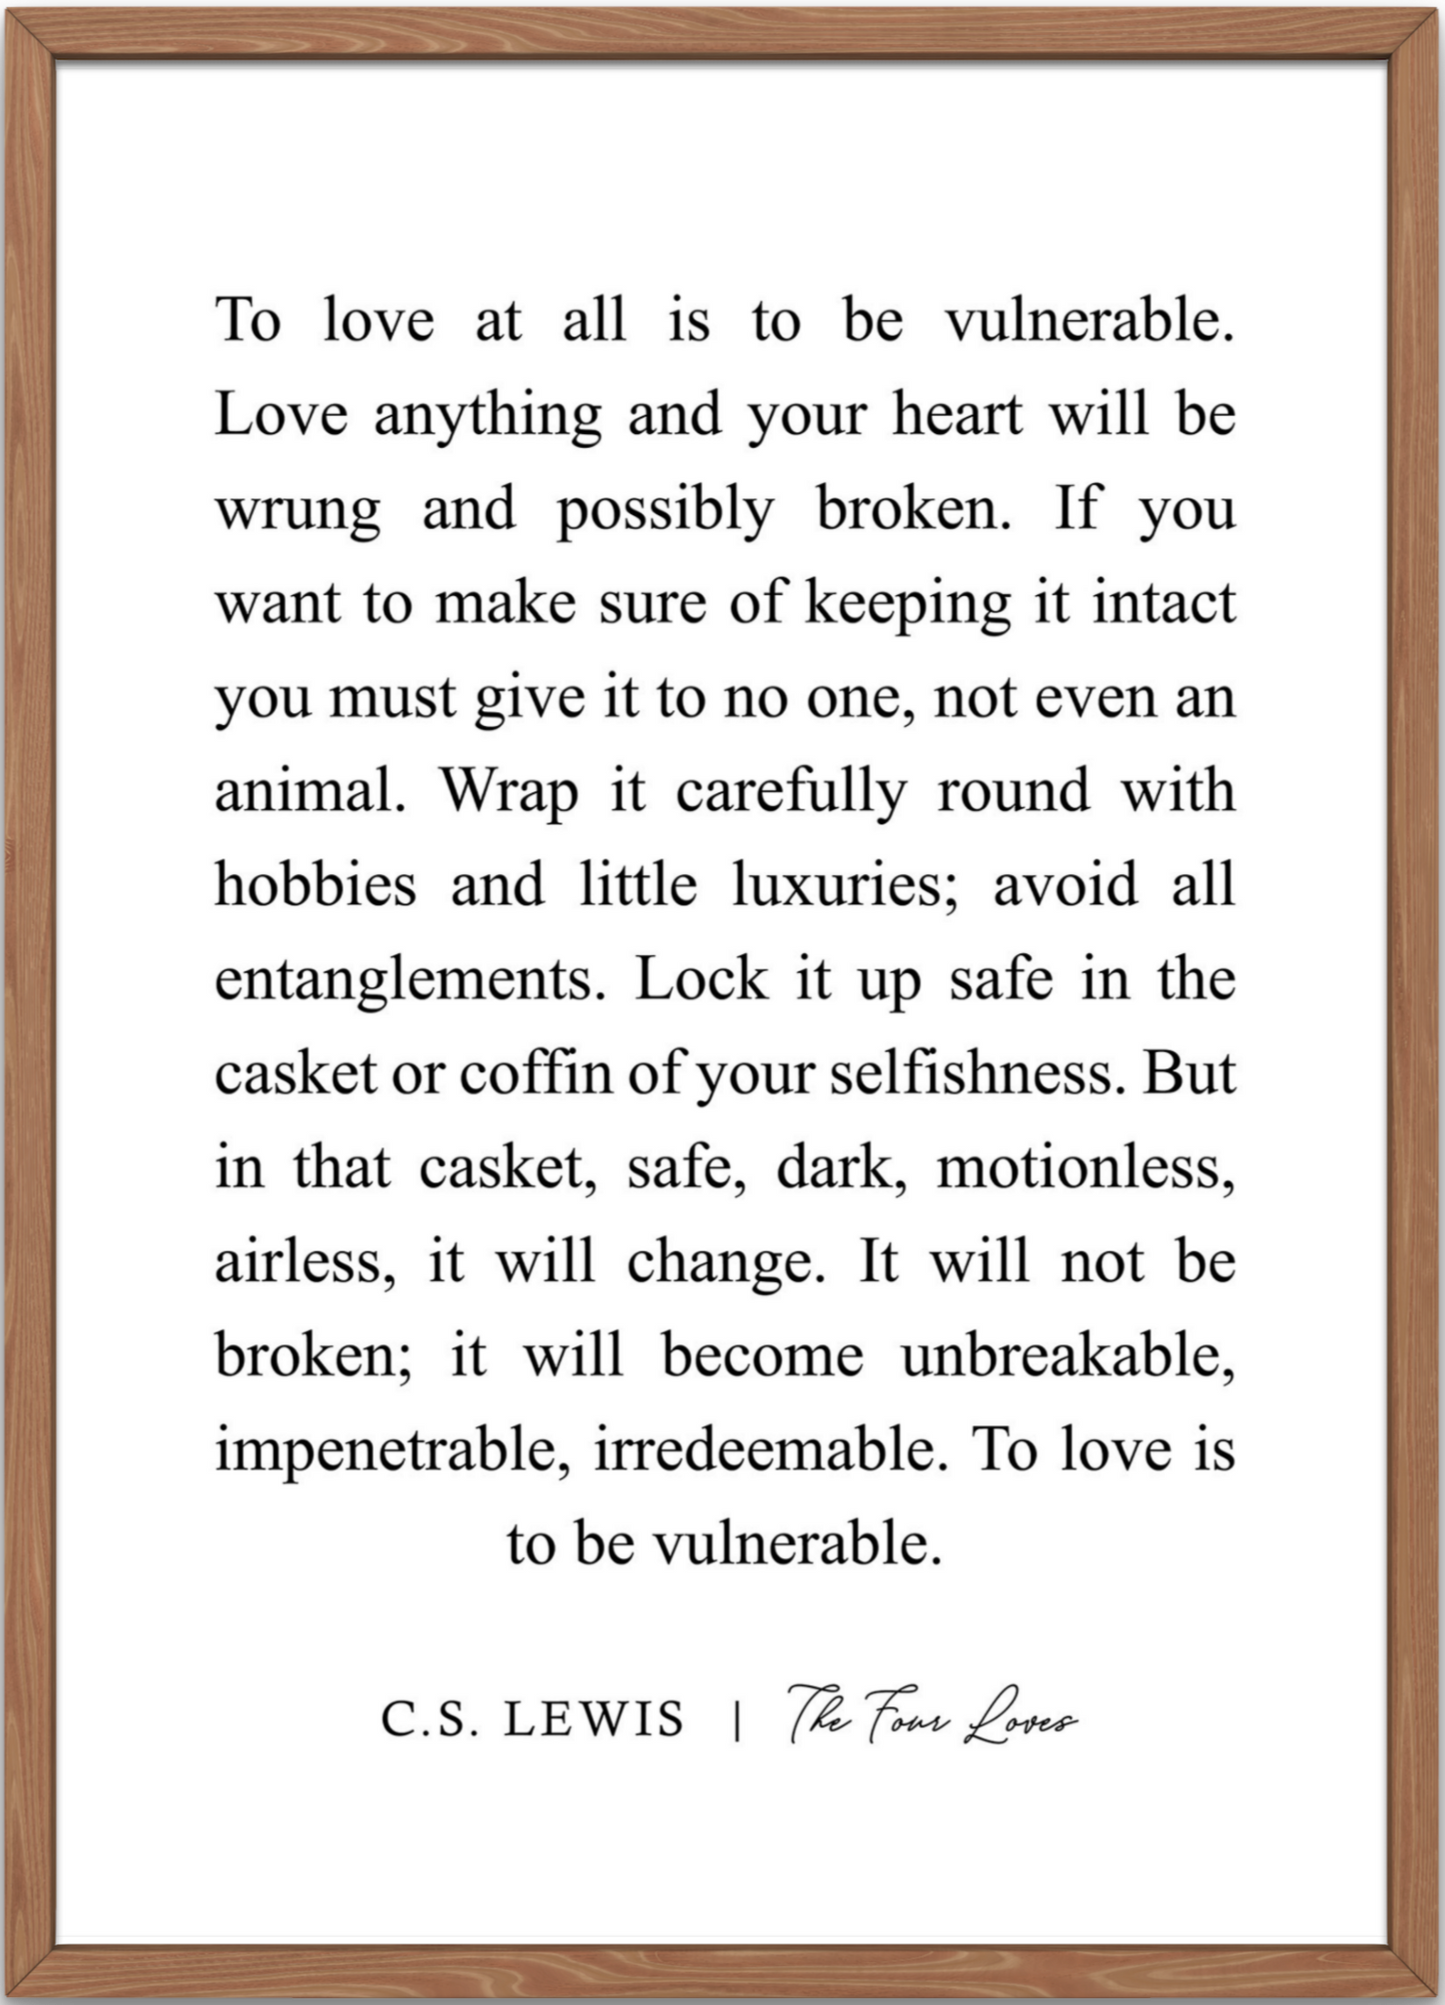 C.S. Lewis | The Four Loves Quote - To love is to be vulnerable